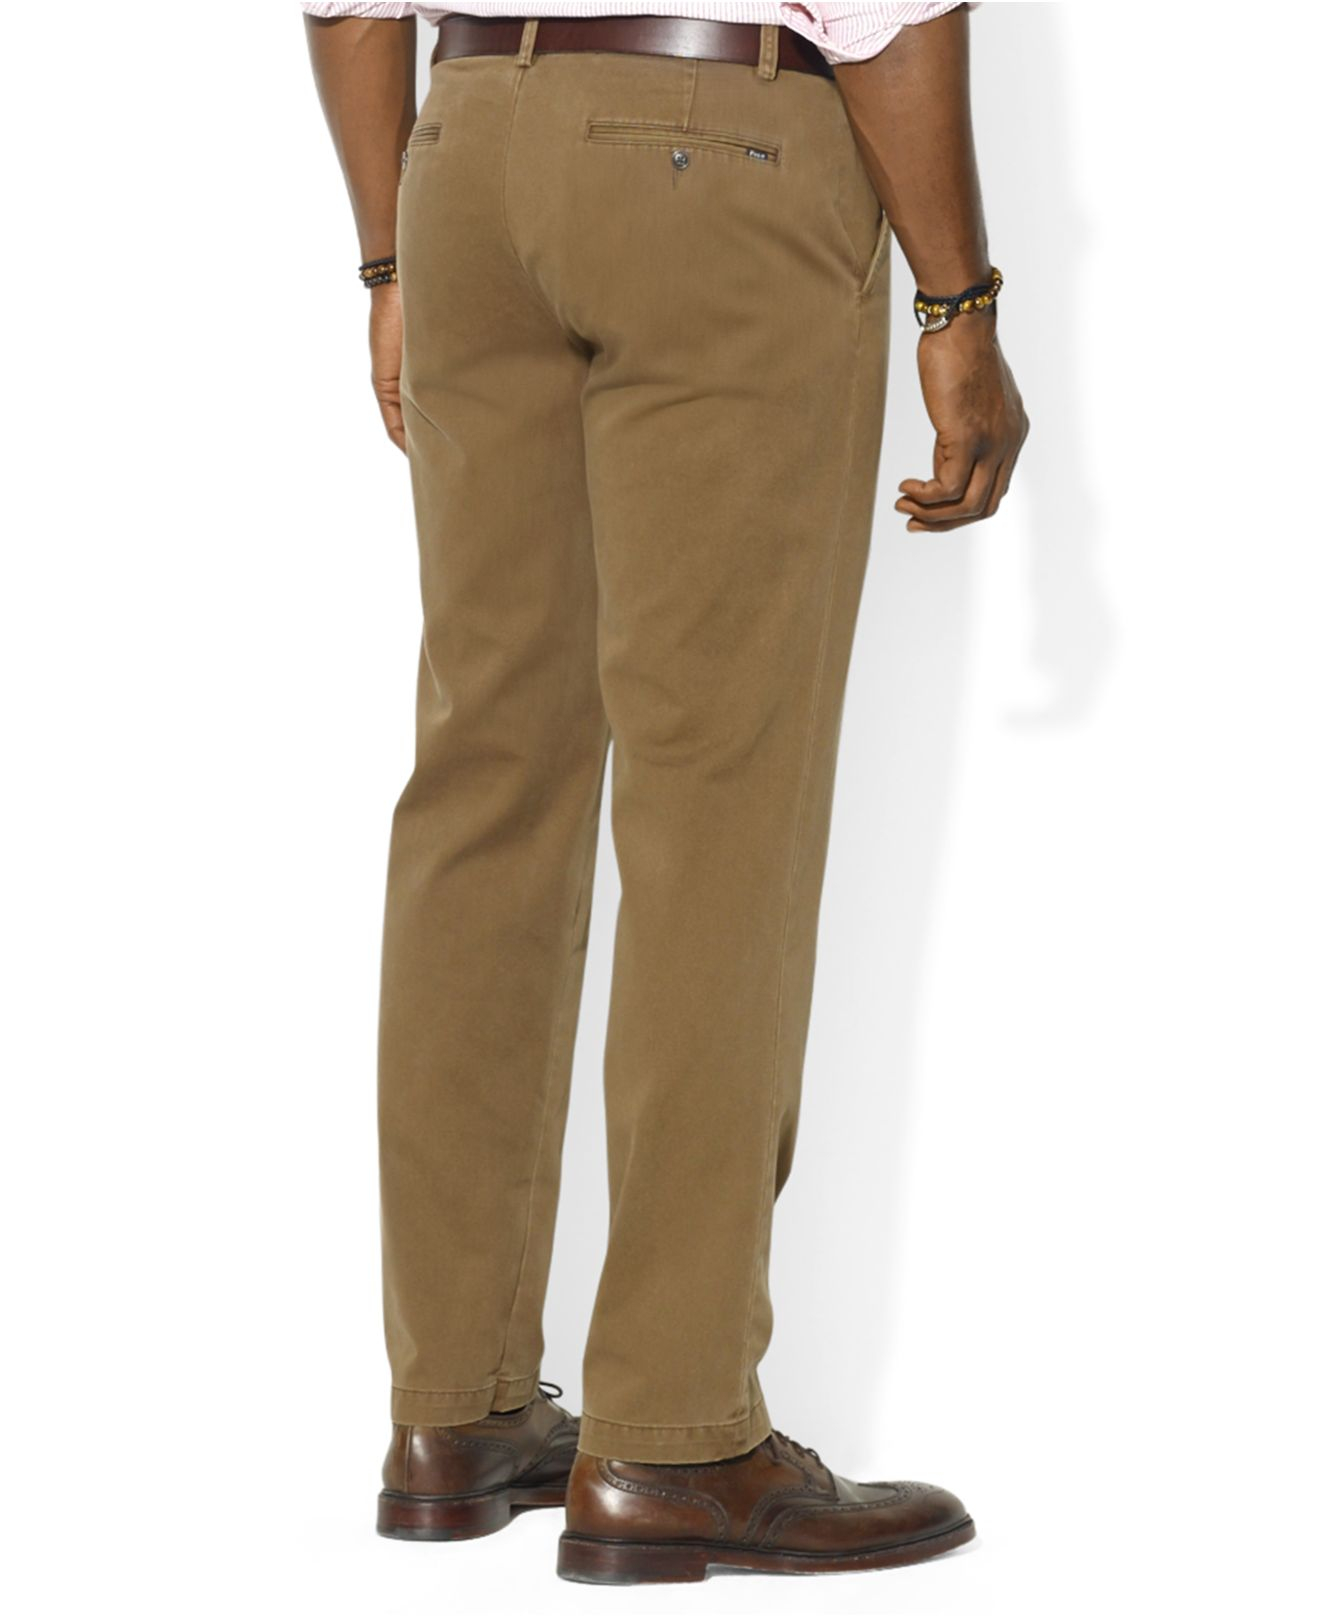 Lyst - Polo Ralph Lauren Suffield Classic-Fit Flat-Front Chino Pants in ...